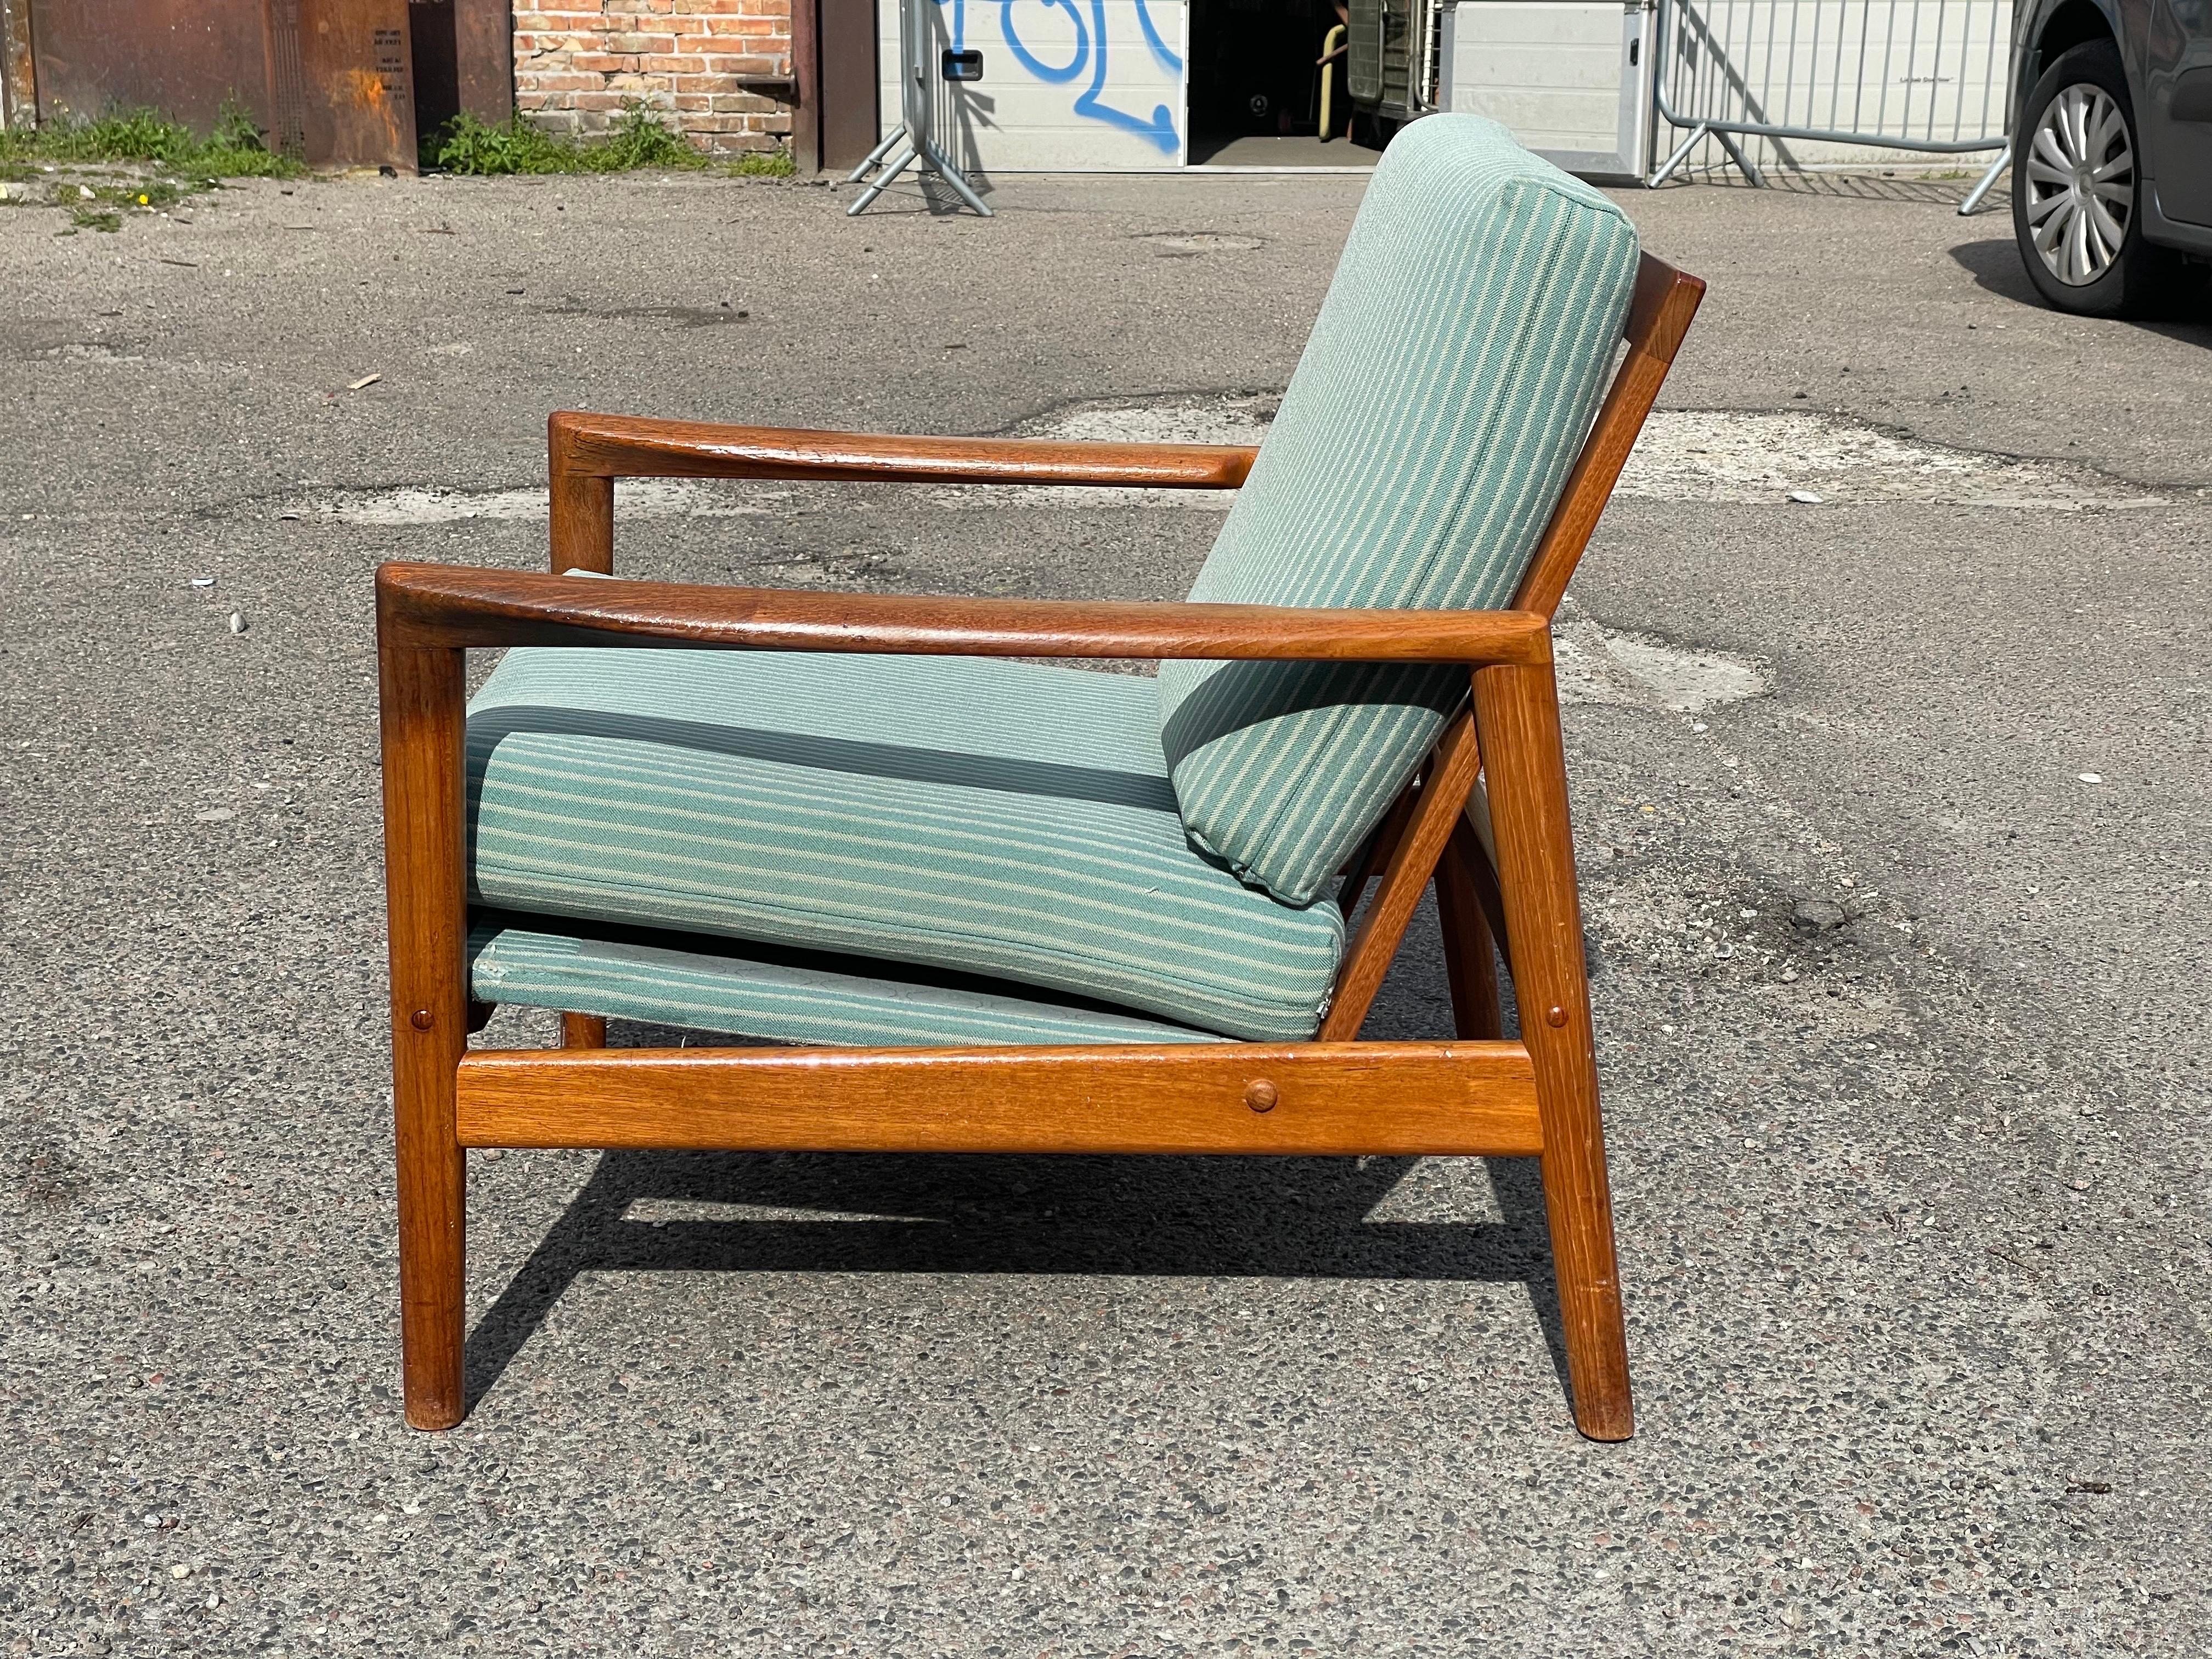 Set of Rare Seen Hans Olsen Teak Chairs by Juul Kristensen from the 1960s For Sale 1